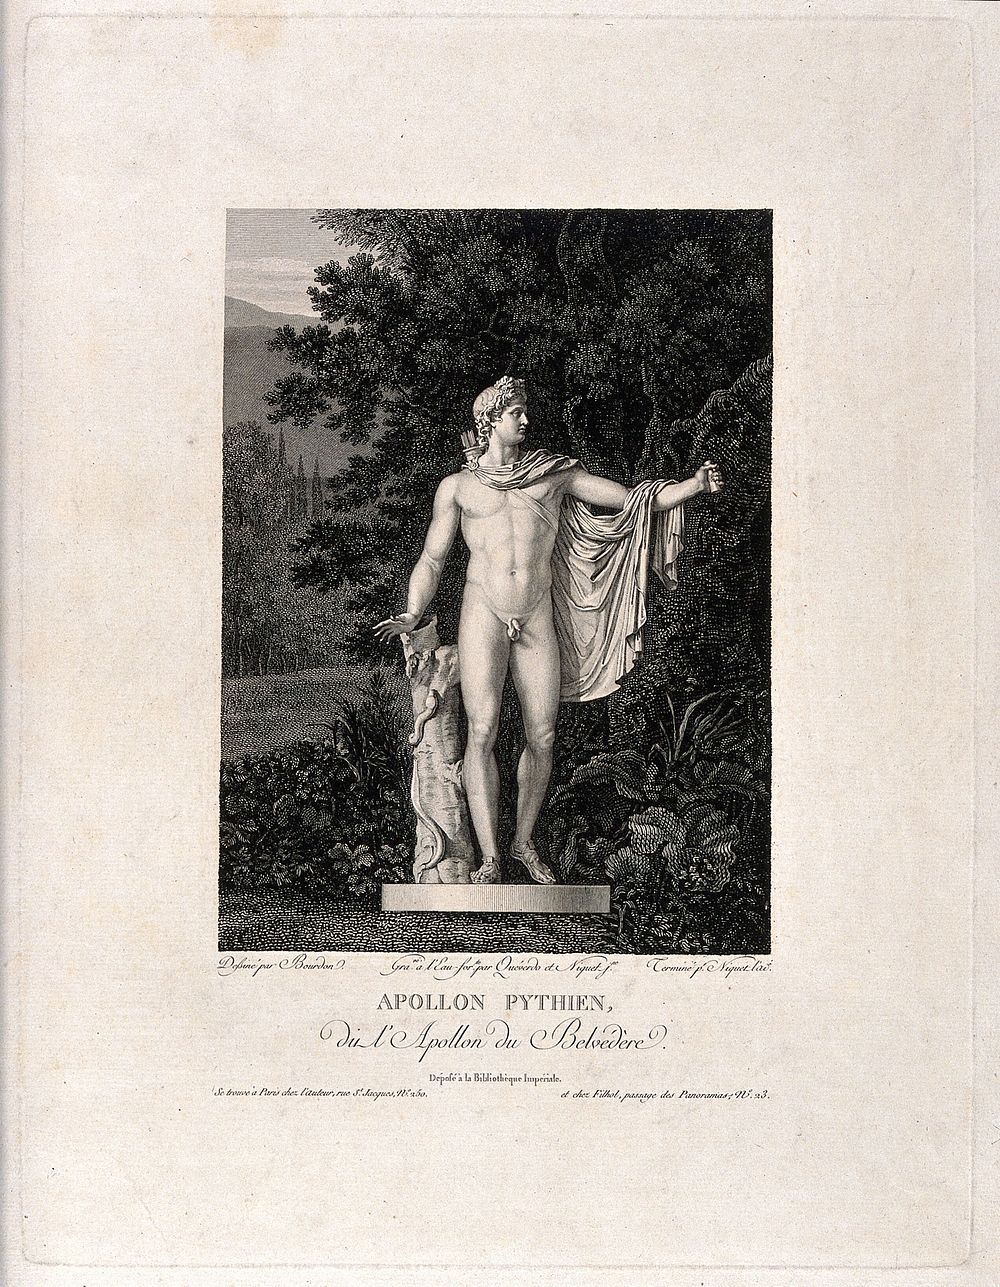 Apollo. Etching by L.M.Y. Quéverdo and Niquet the younger and engraving by C. Niquet after Bourdon.